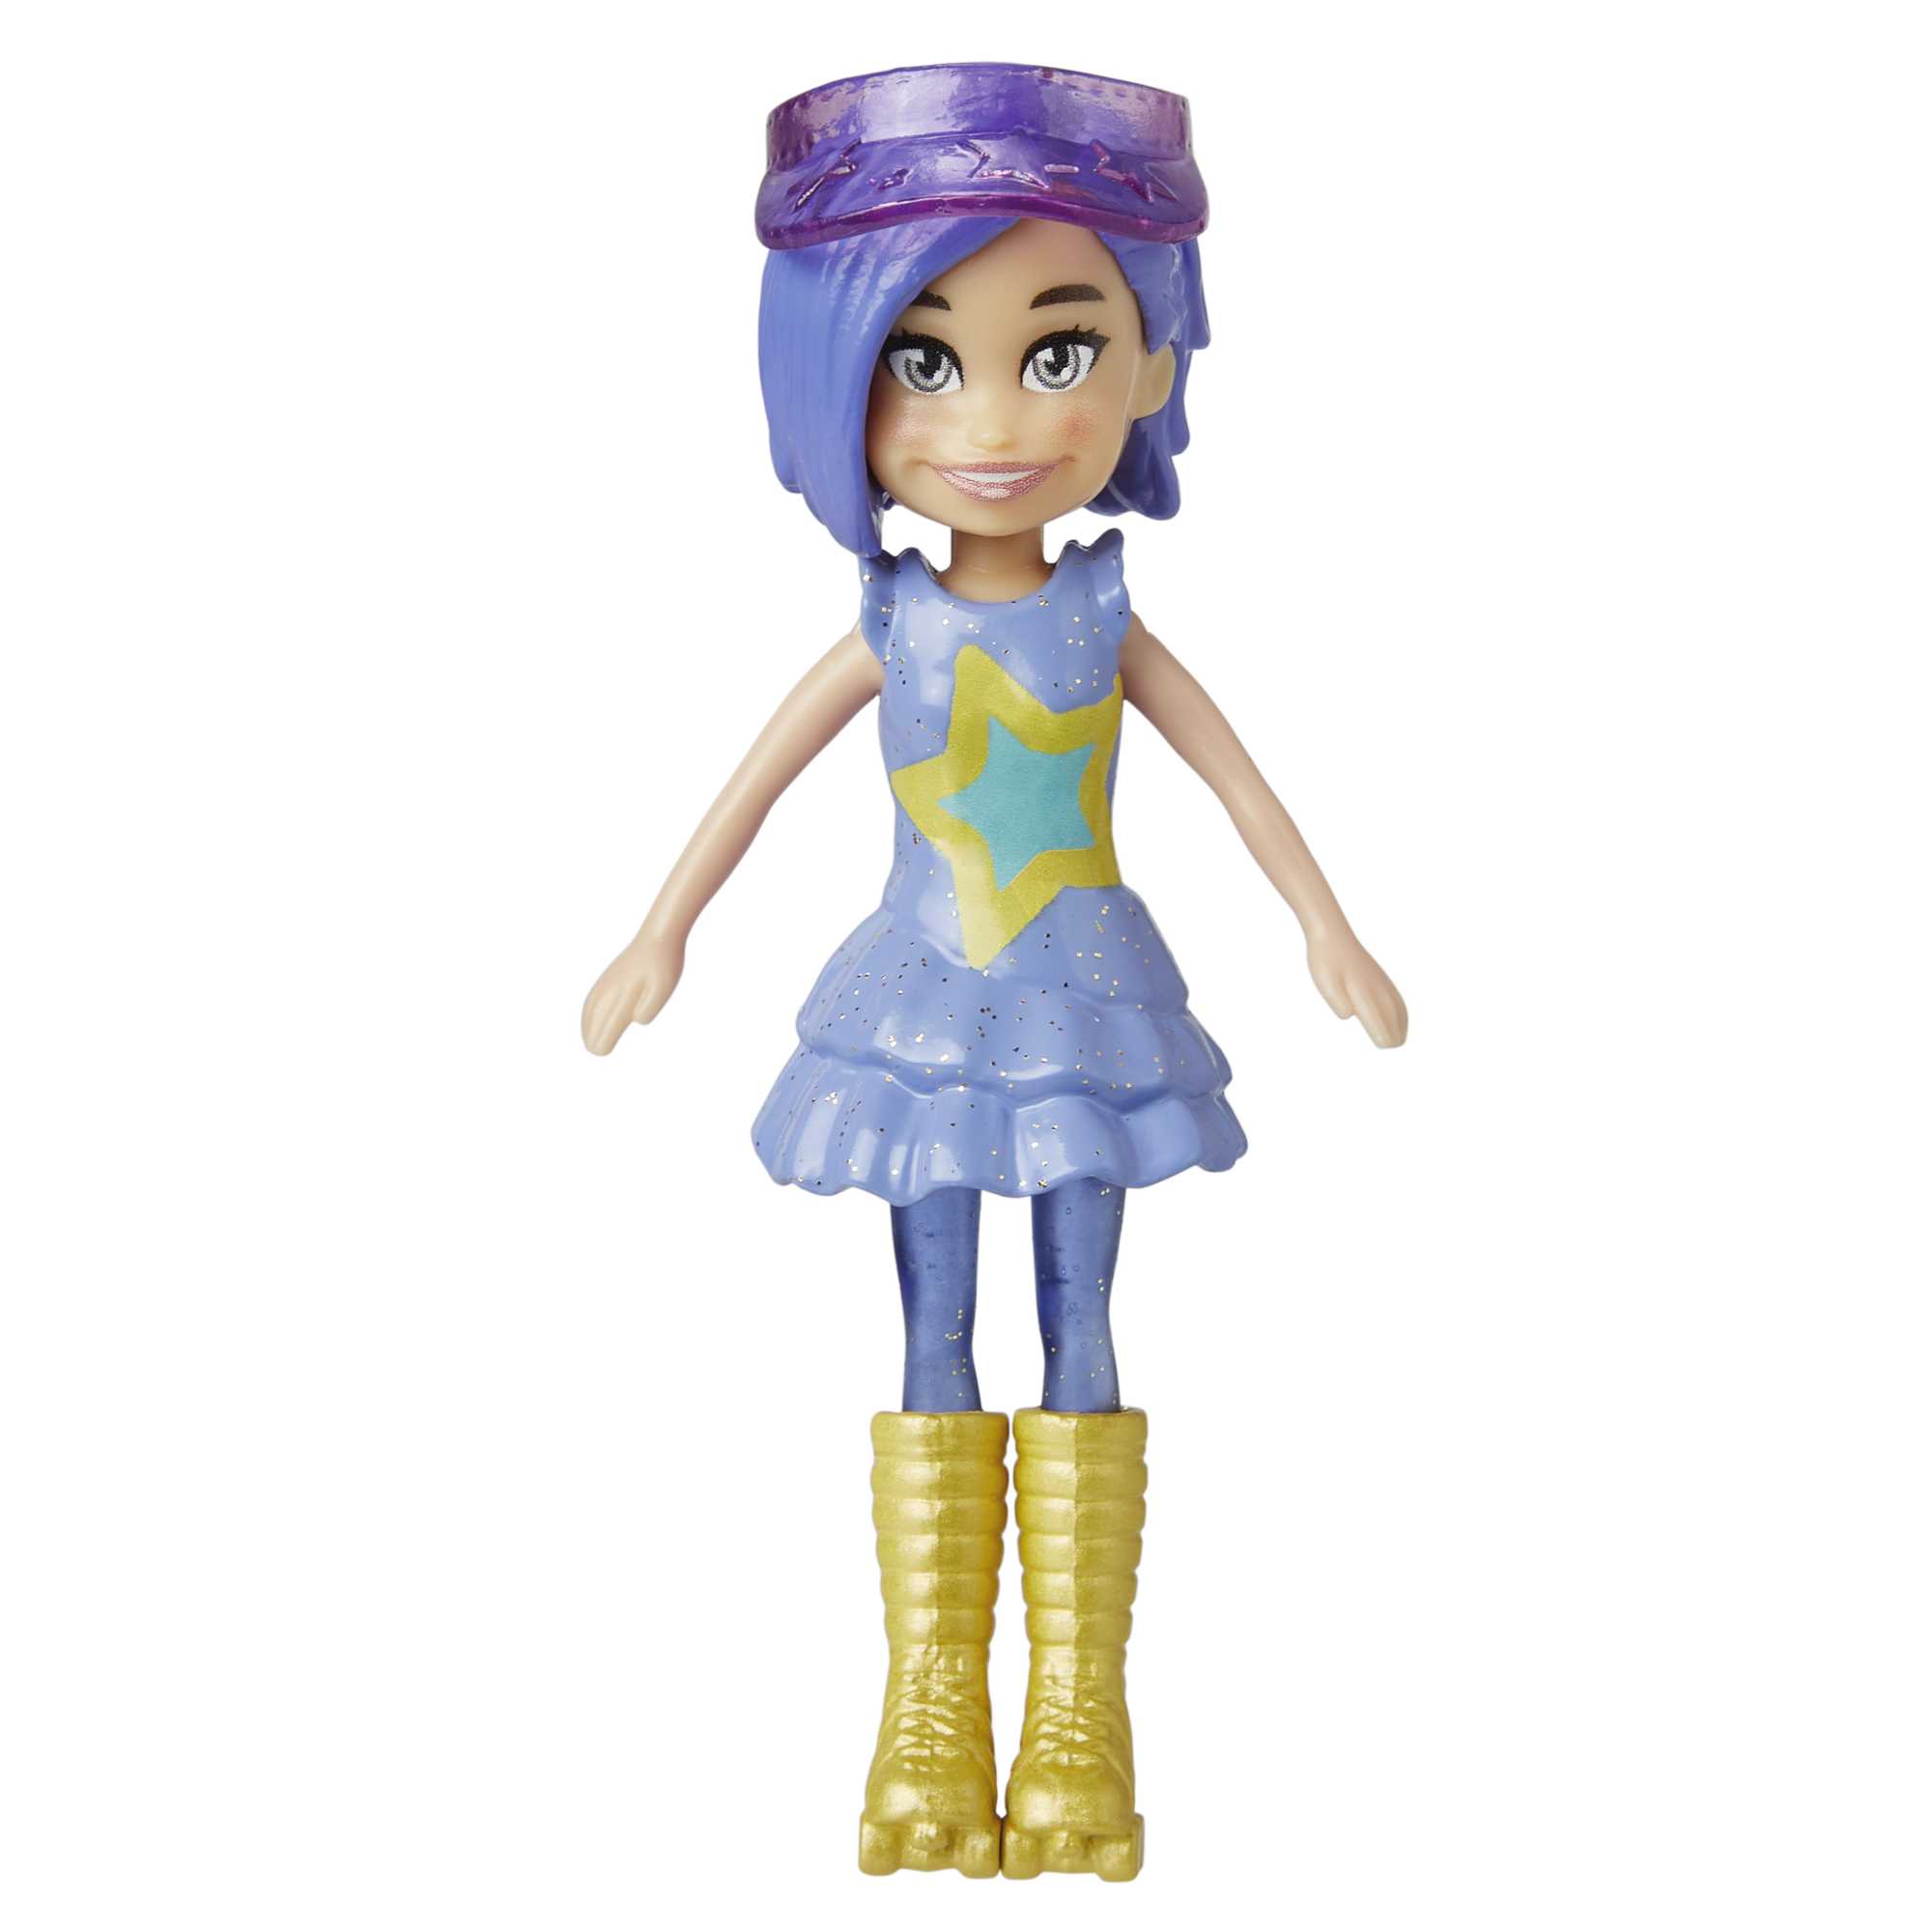 Polly Pocket Doll With Trendy Outfit 2018 Edition Measures Approx. 3.5  Tall (1 Doll)